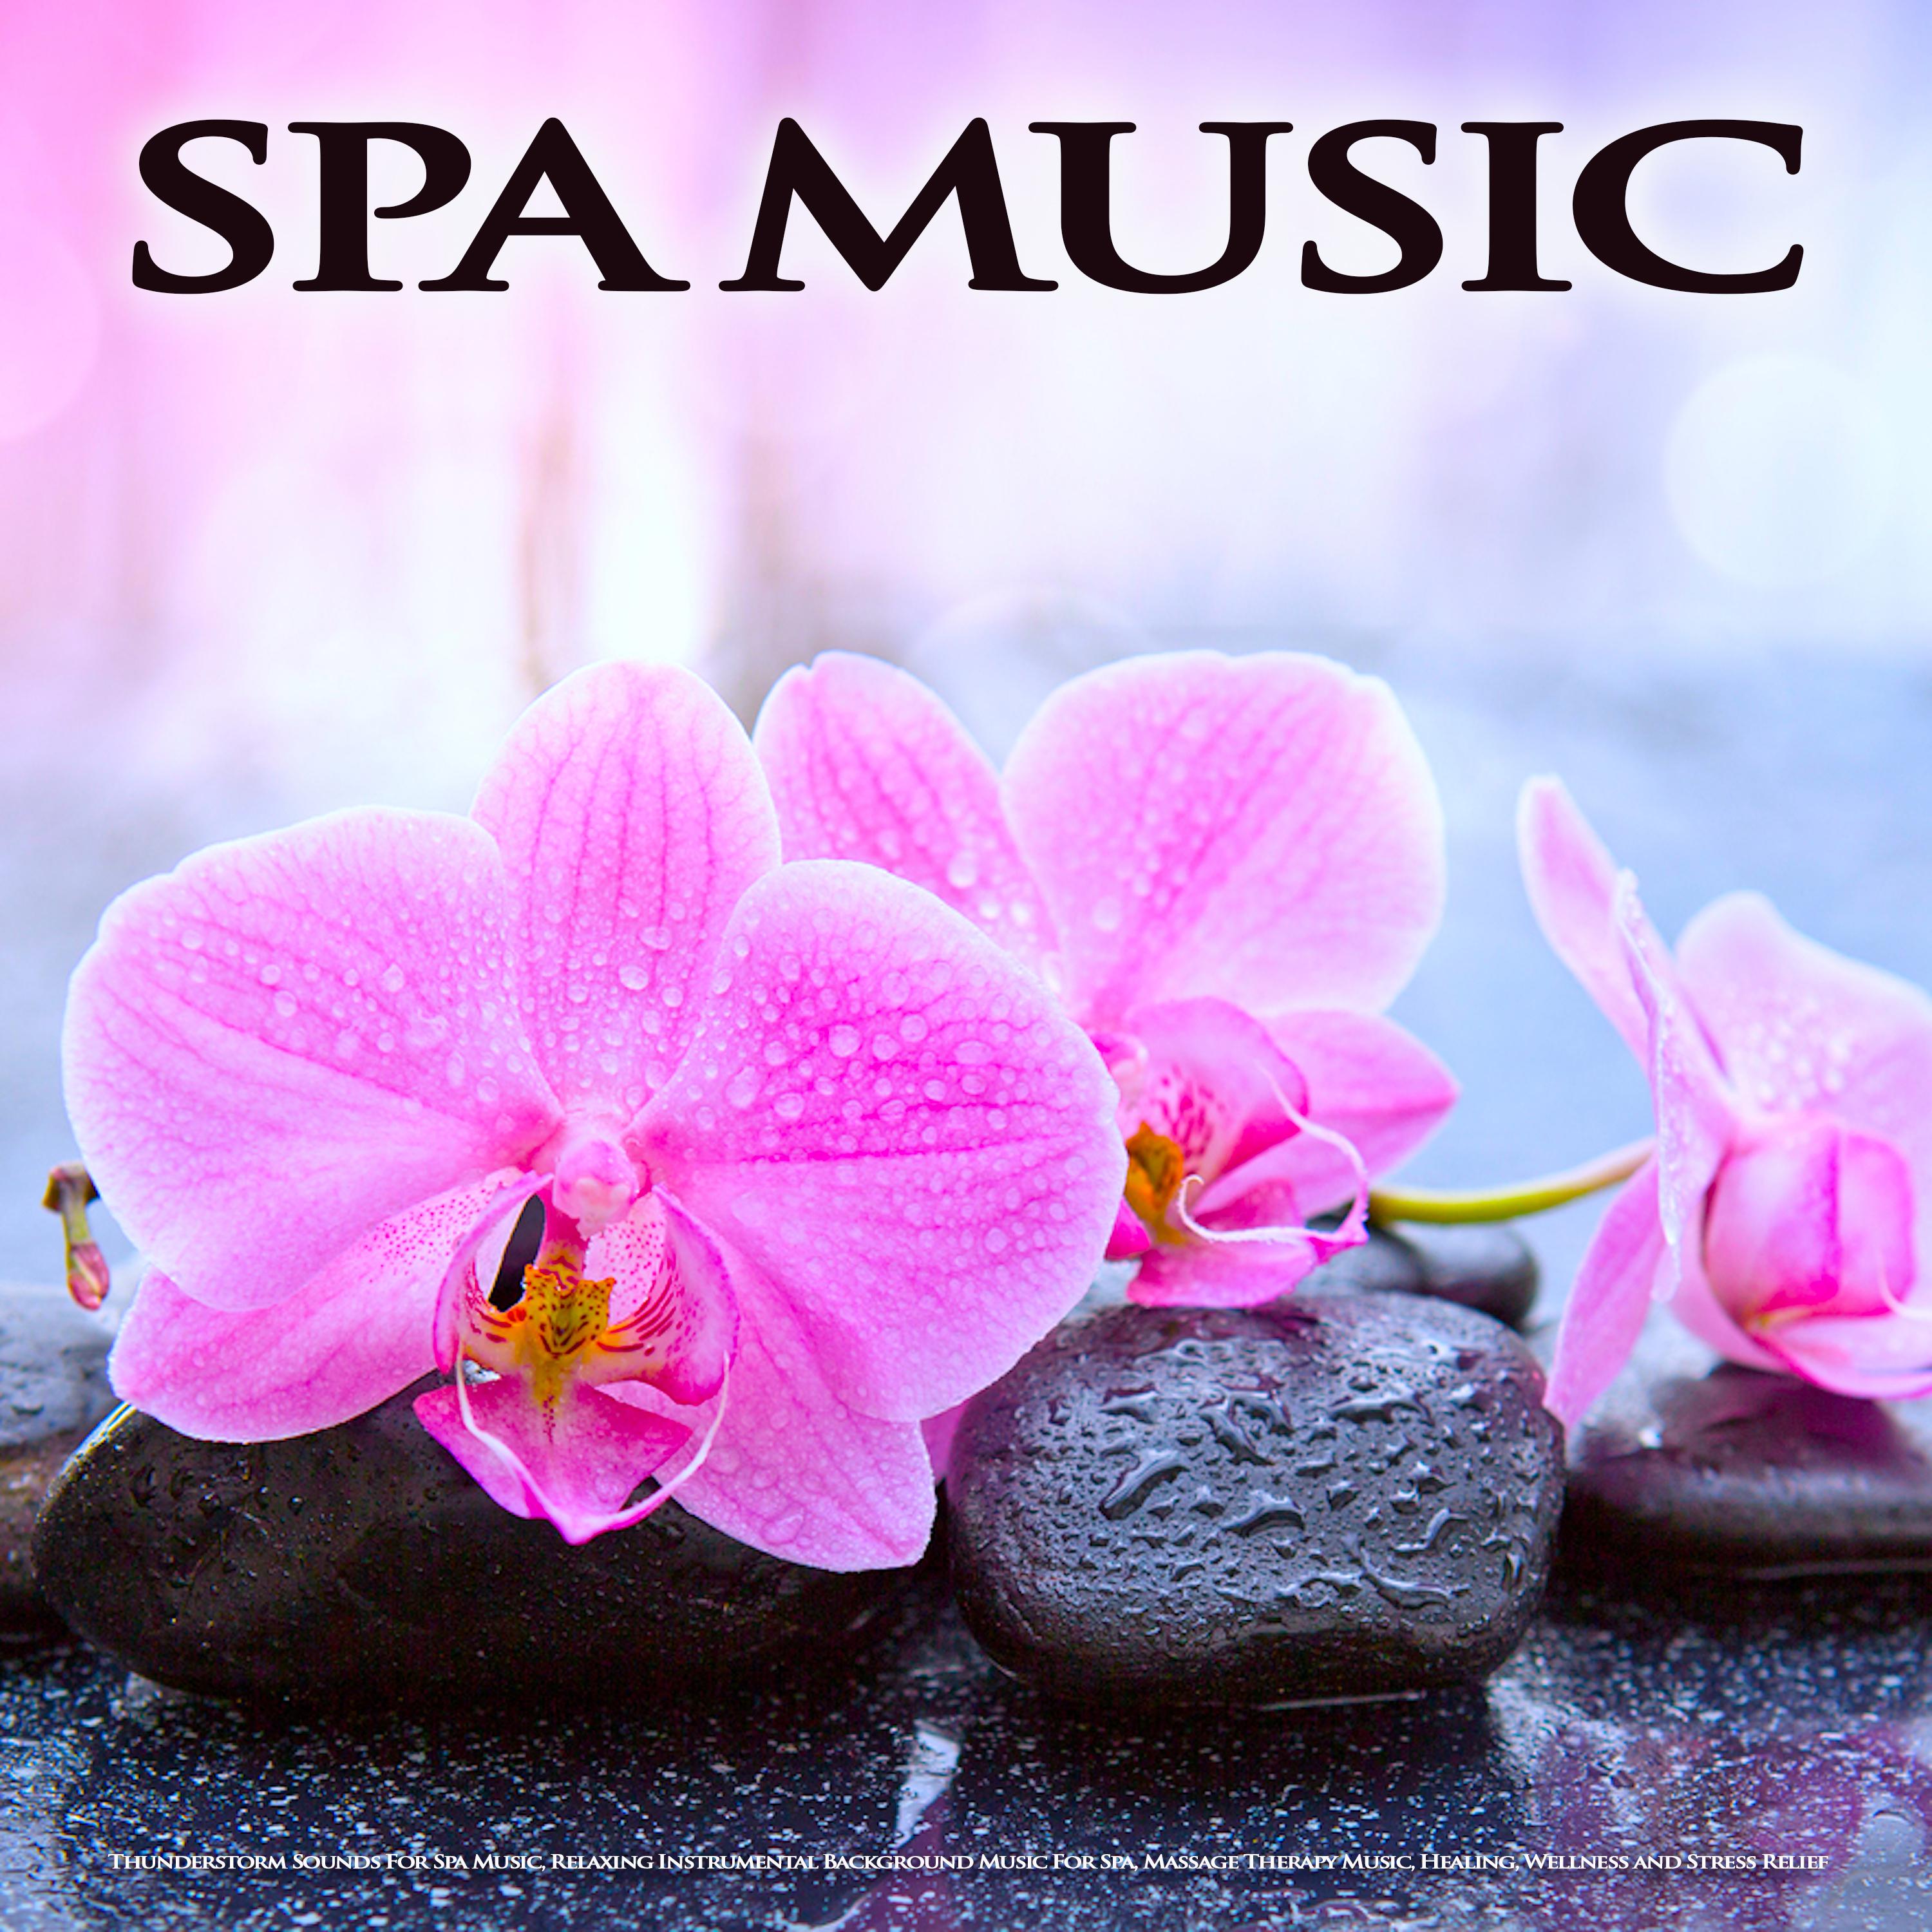 Music For Spa and Thunderstorm Sounds